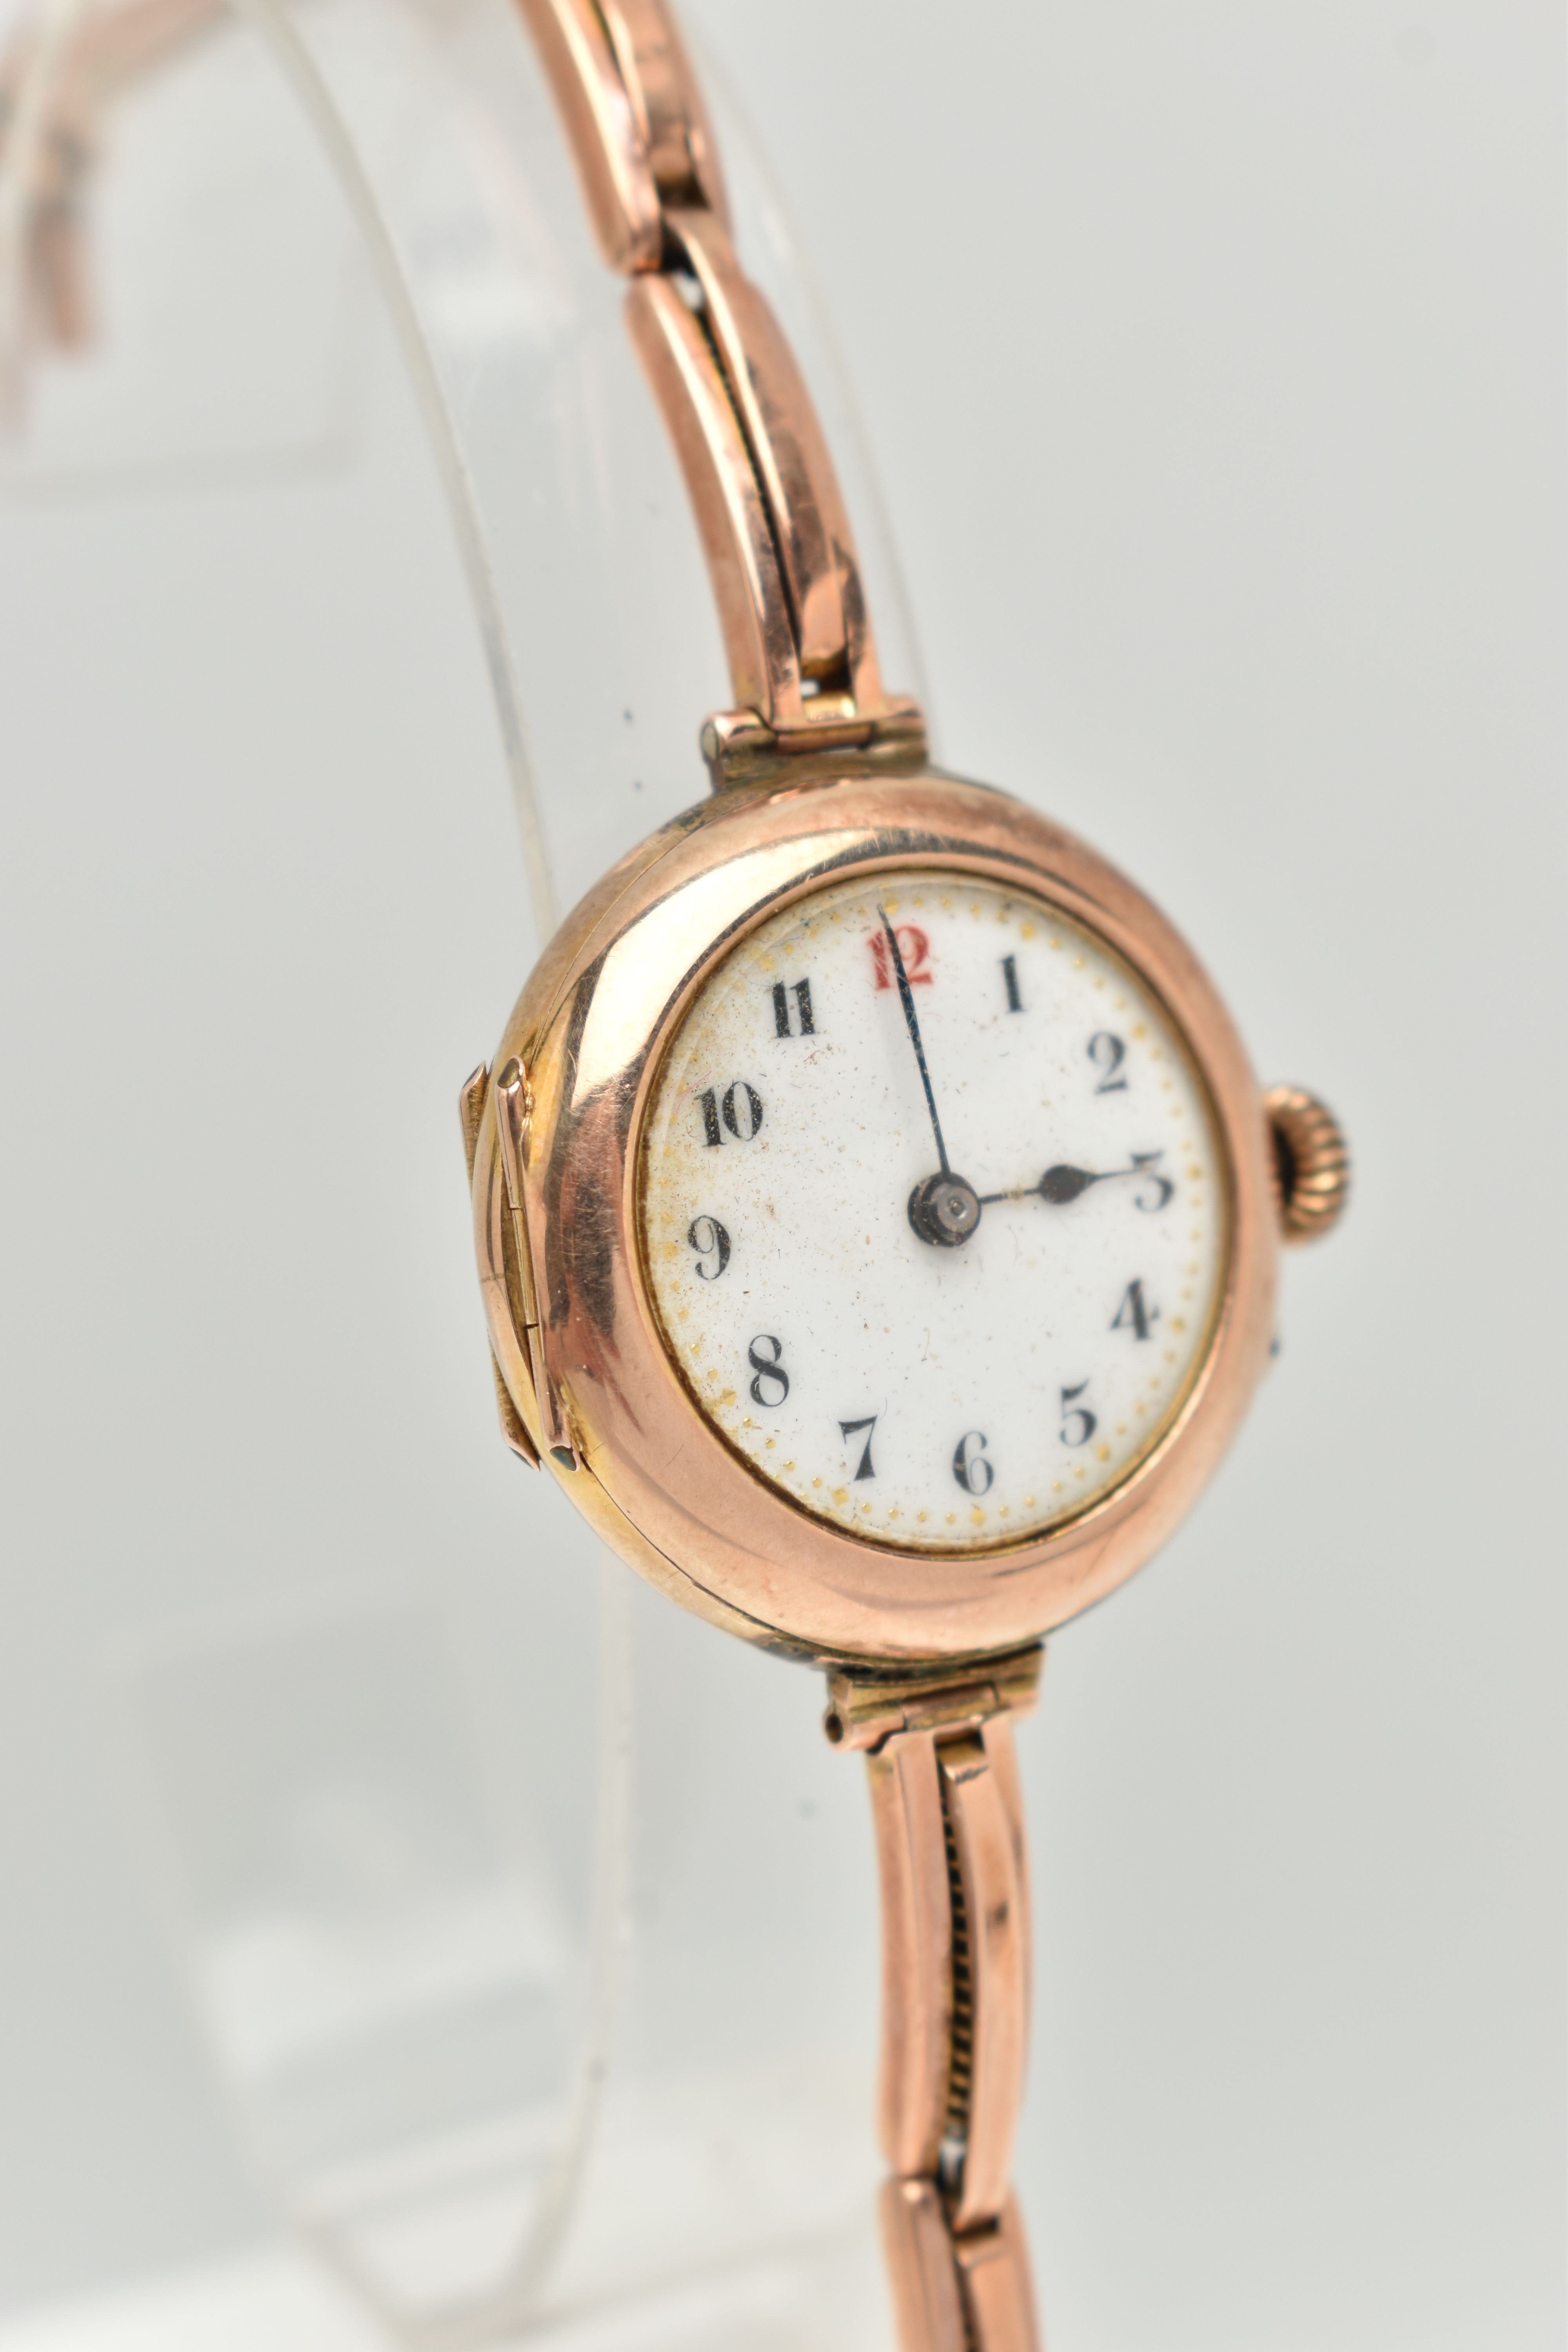 AN EARLY 20TH CENTURY LADIES WRISTWATCH, hand wound movement, round dial, Arabic numerals, rose gold - Image 3 of 6